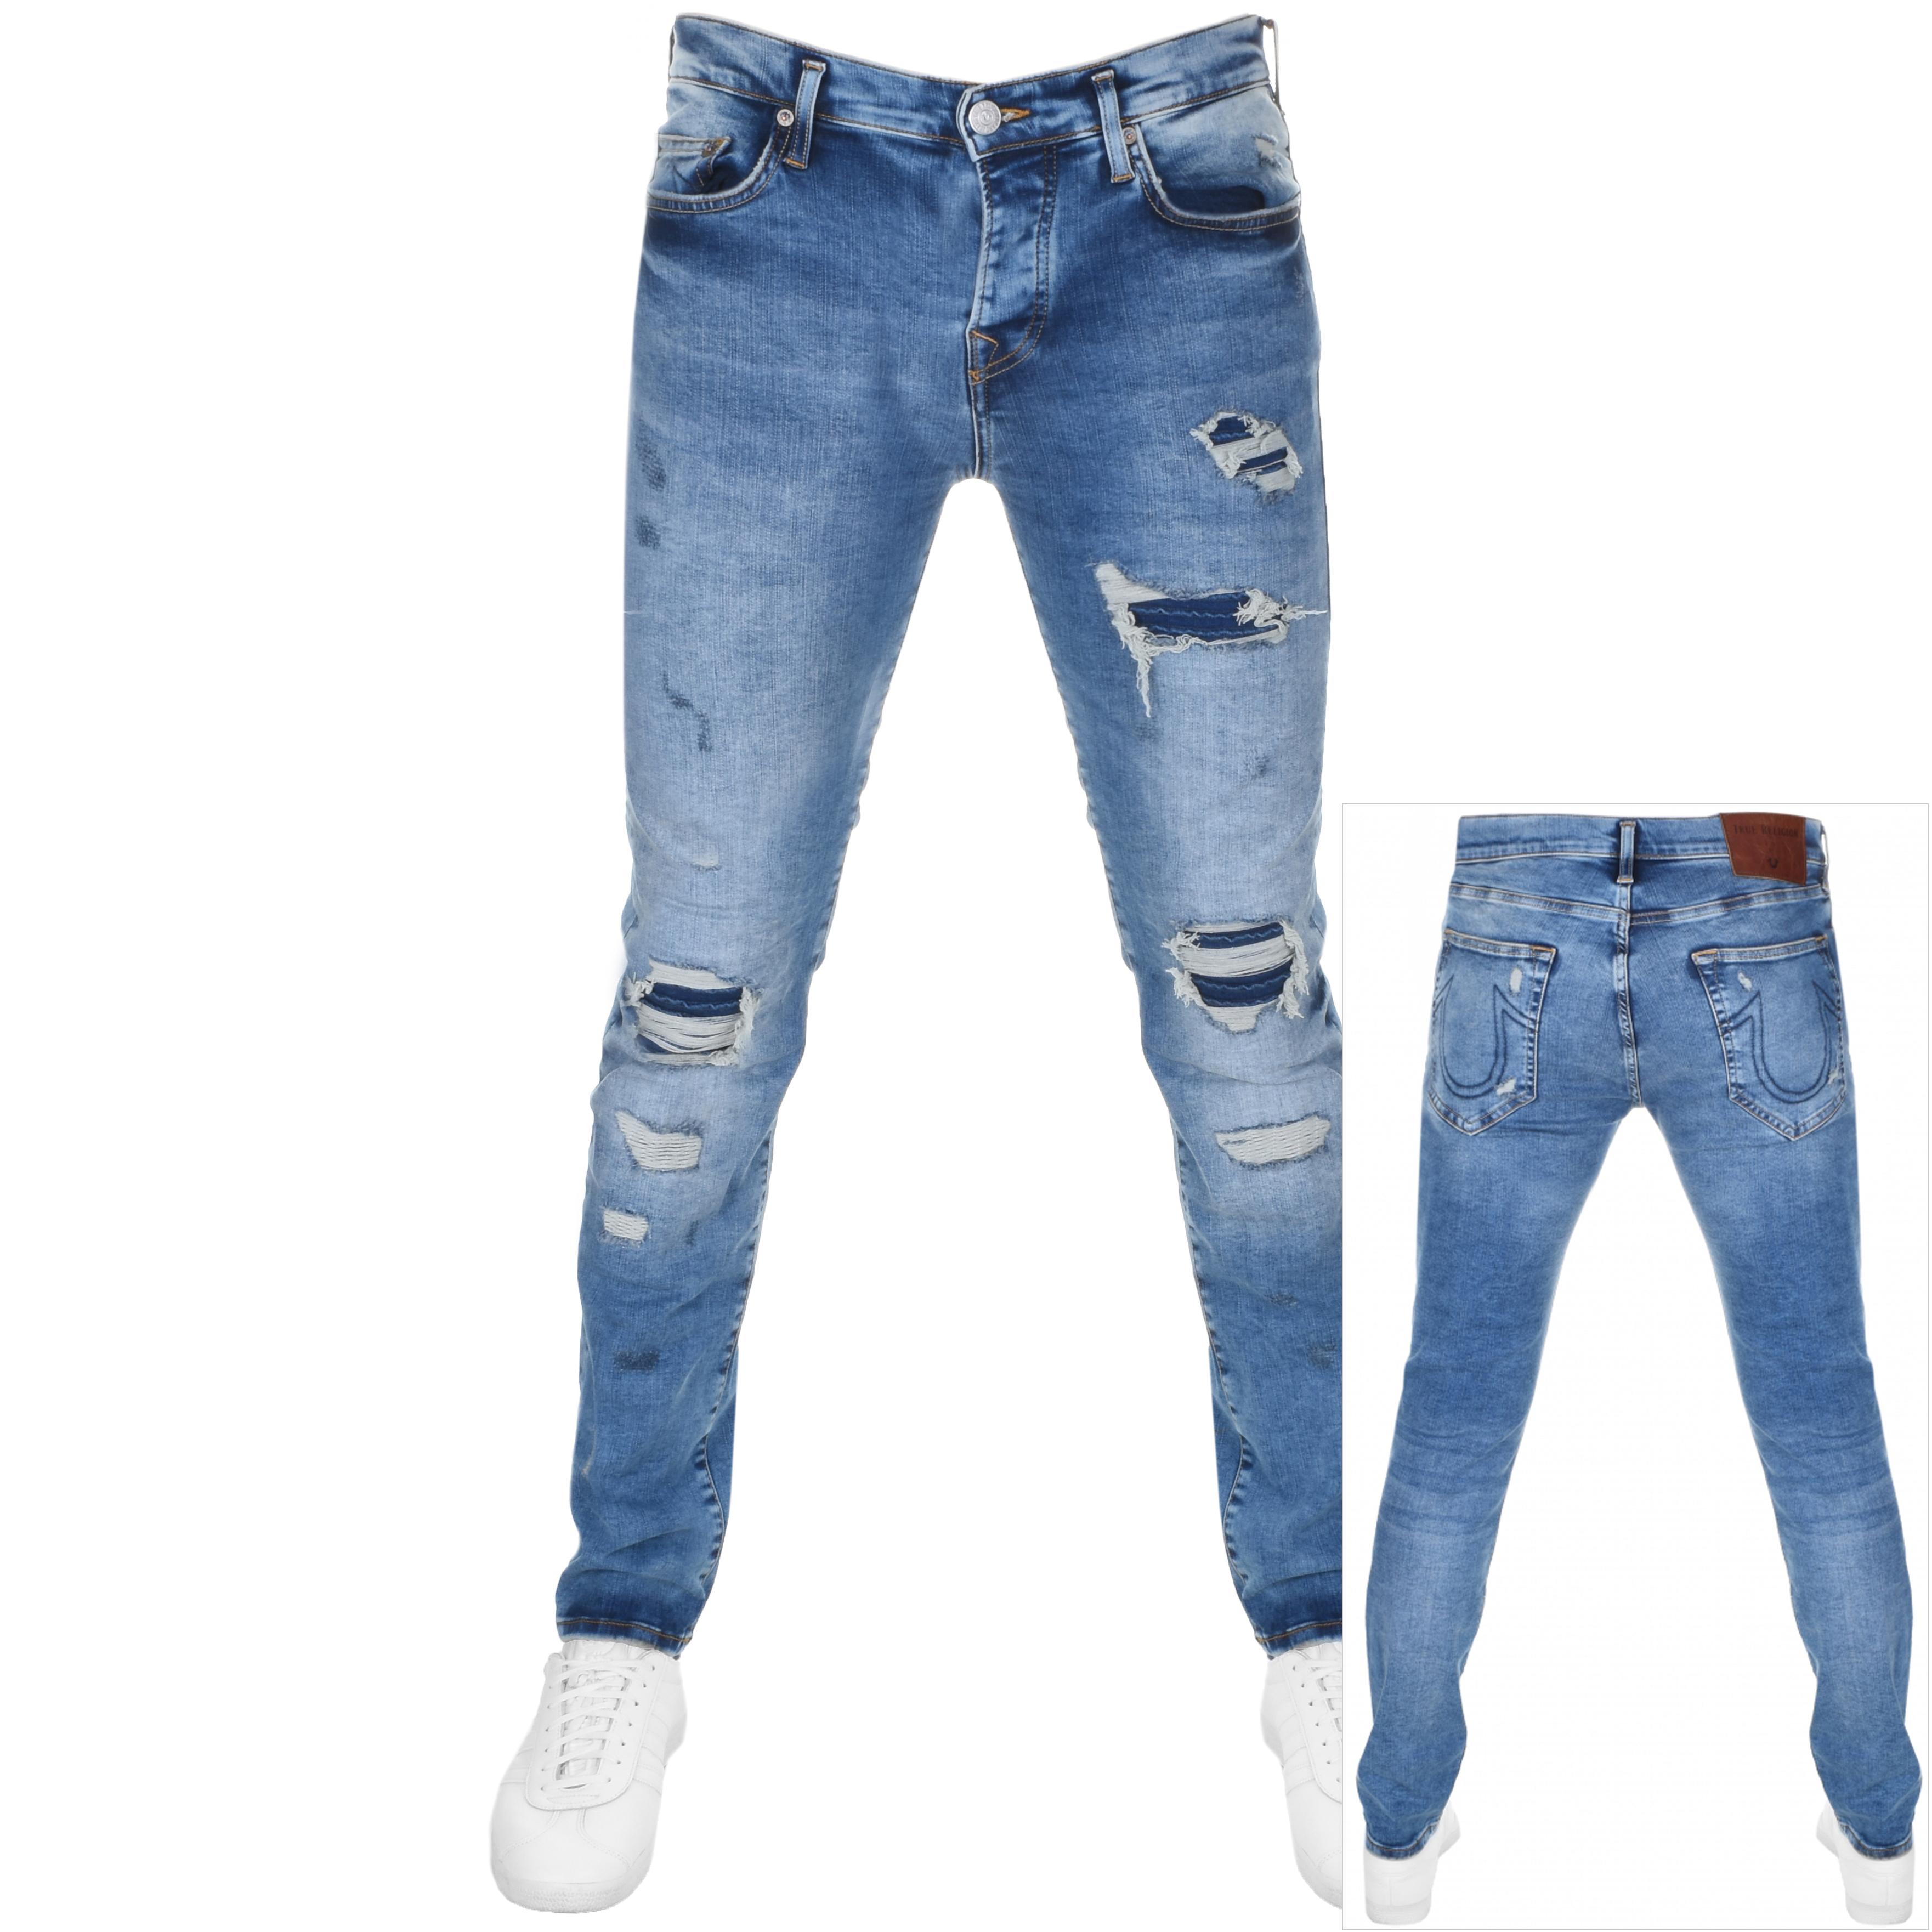 Lyst - True Religion Rocco Jeans Blue in Blue for Men